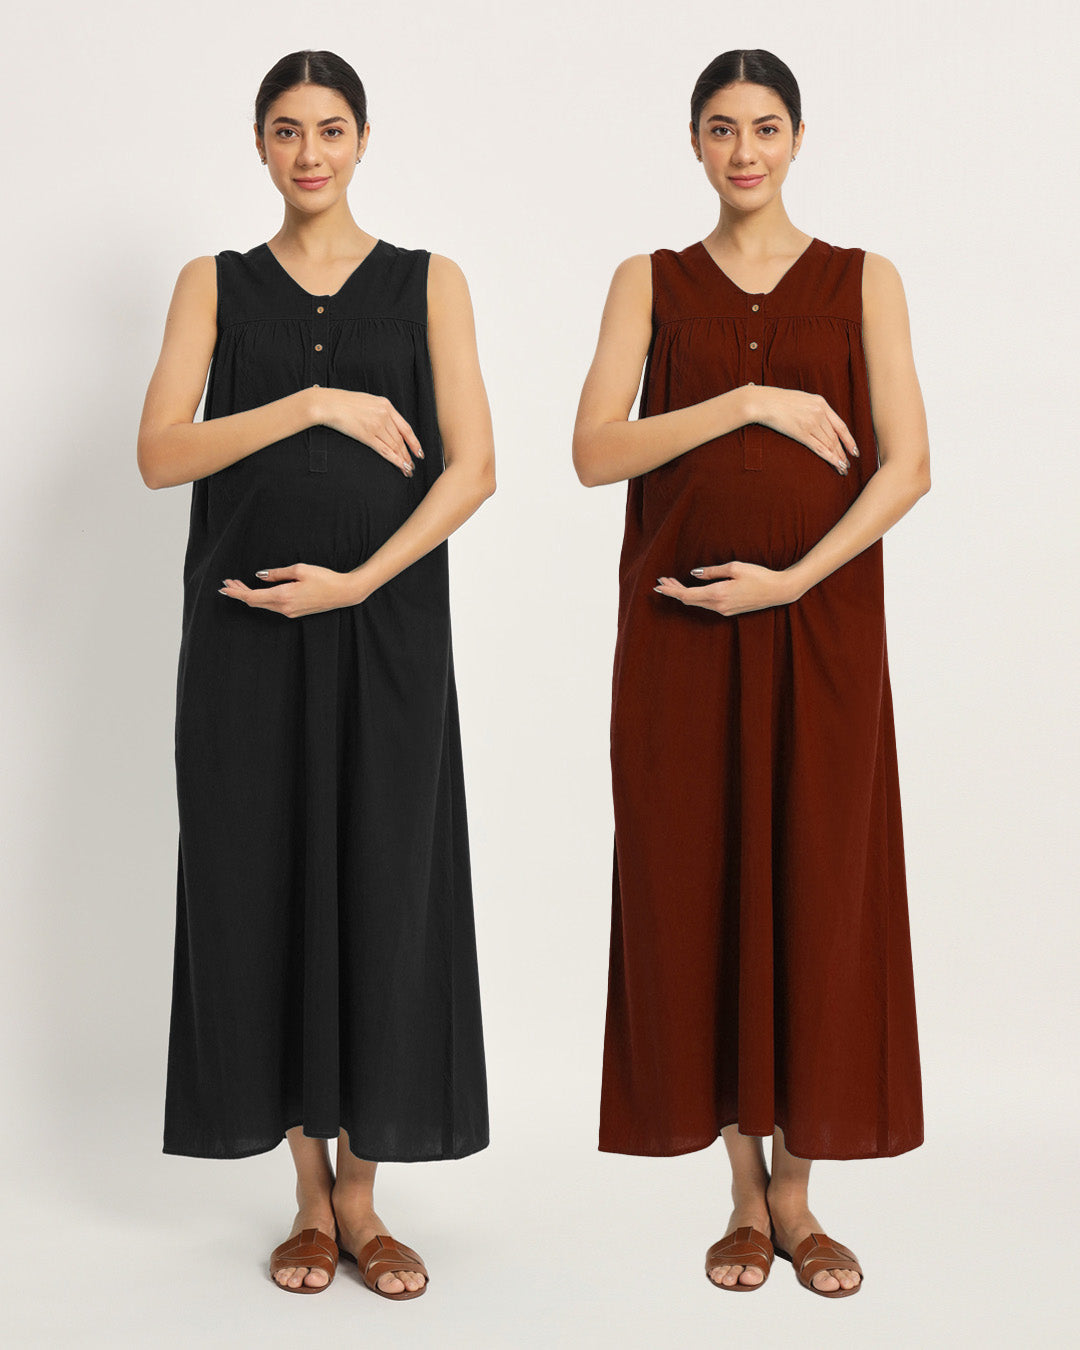 Combo: Black & Russet Red Mommylicious Maternity & Nursing Dress